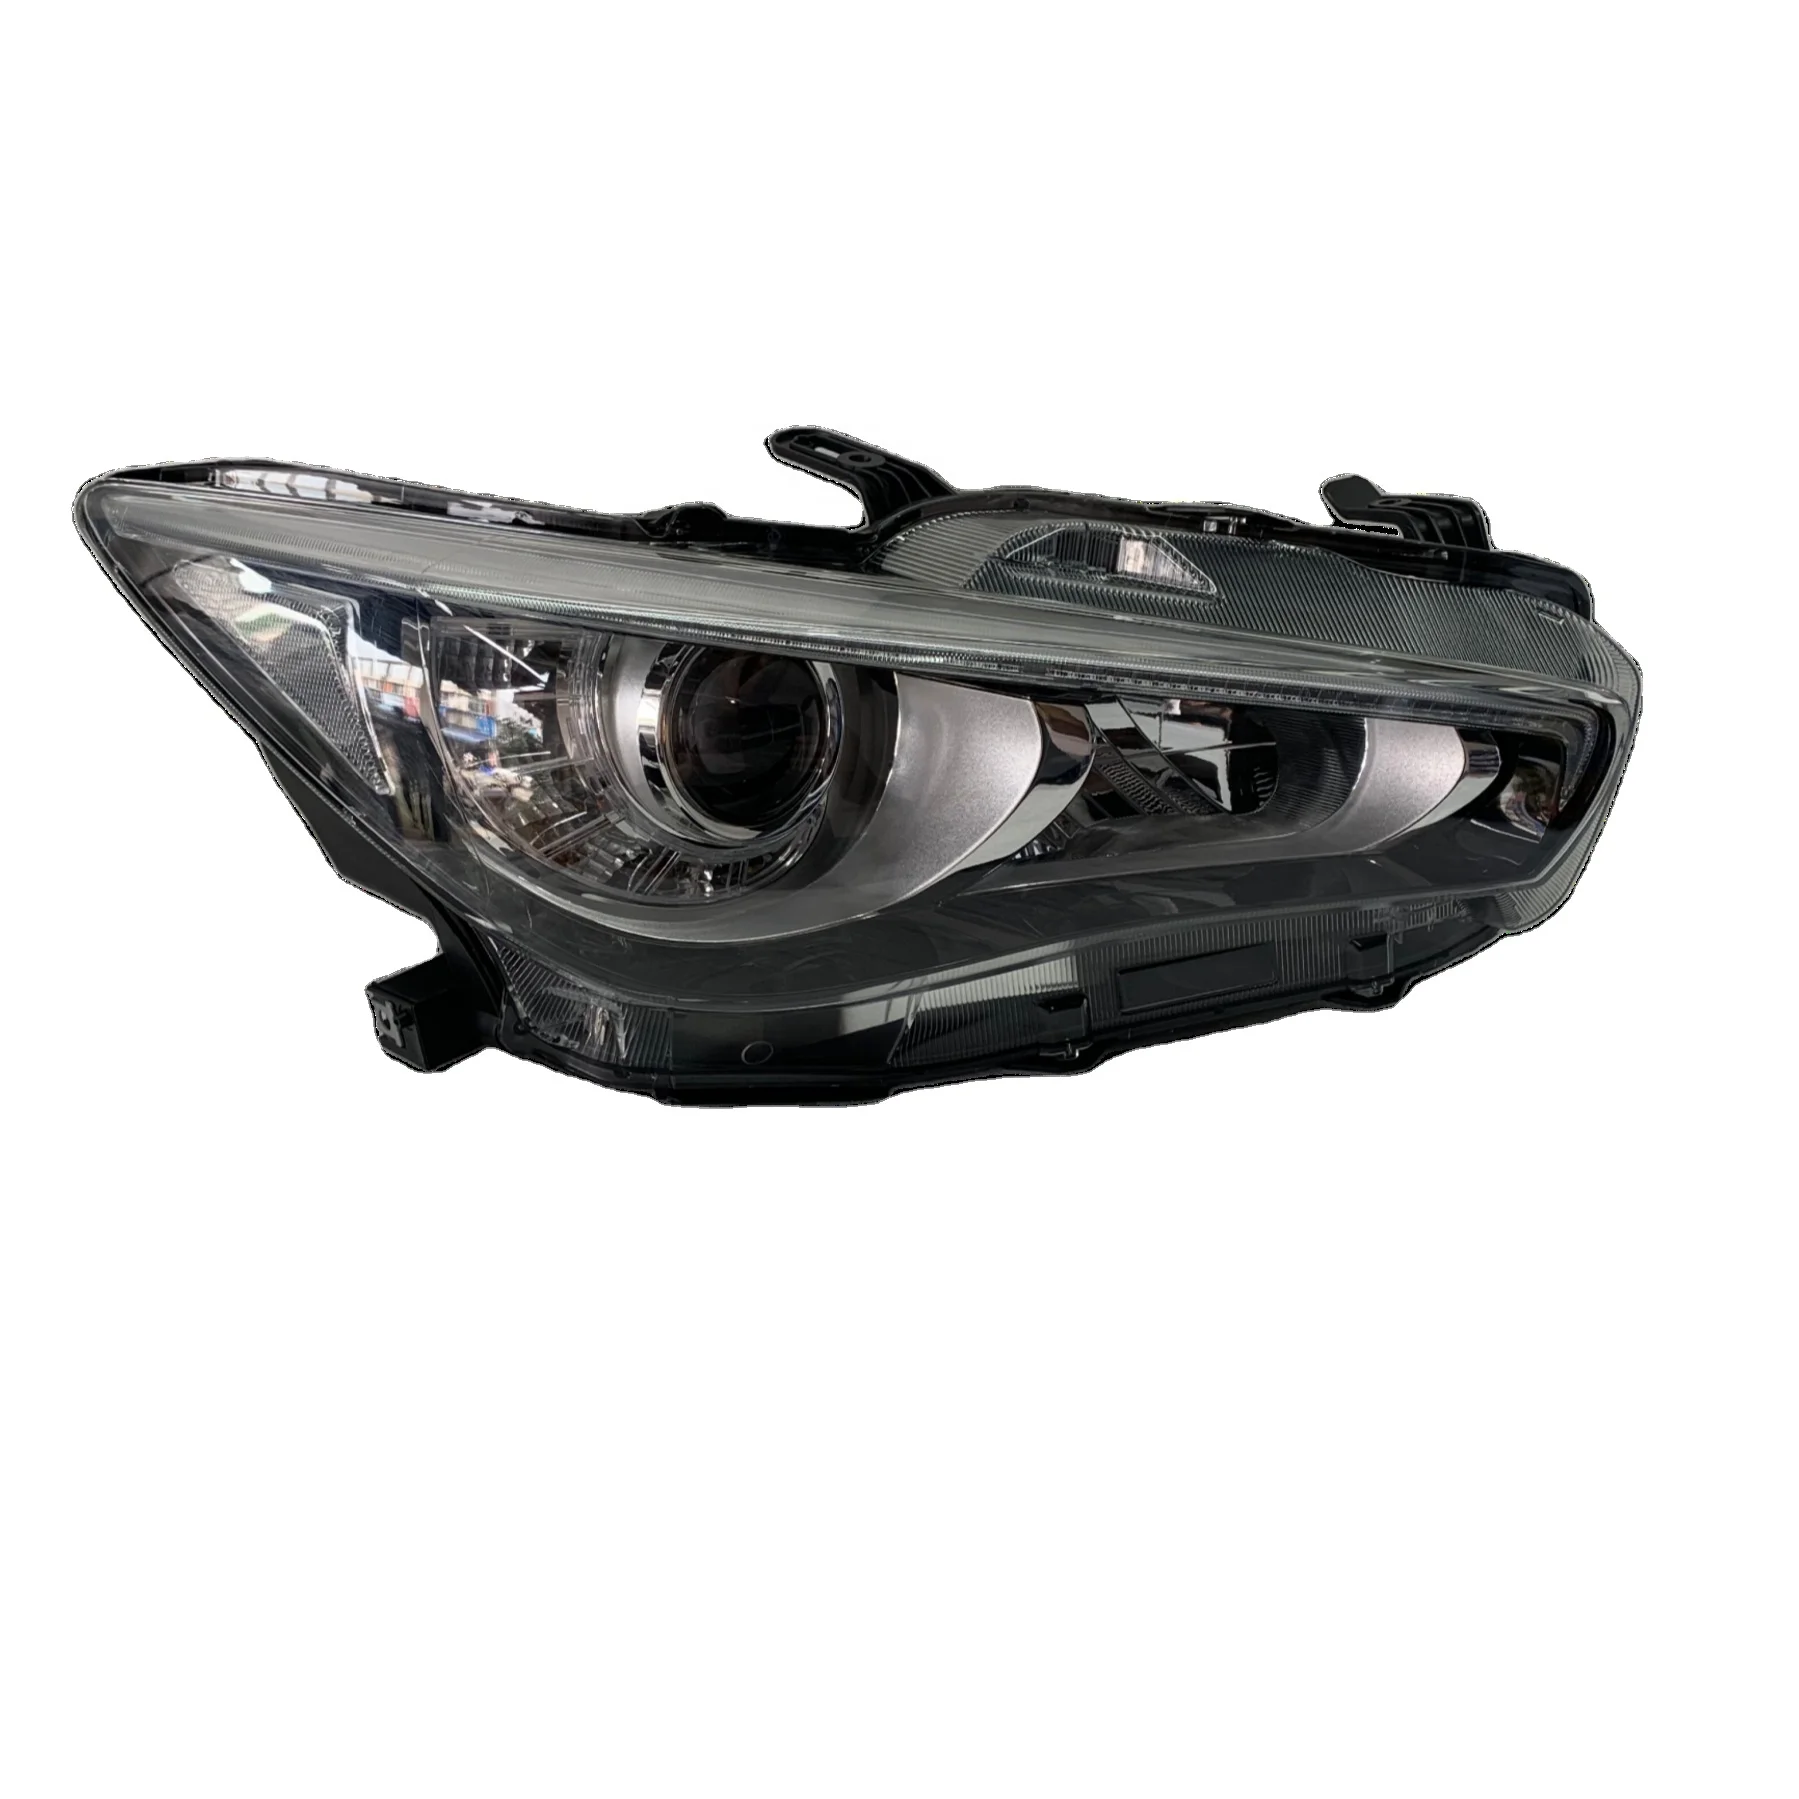 

Original high-quality headlights suitable for 2015-2022 Infiniti Q50 hernia headlights LED with AFS function headlights